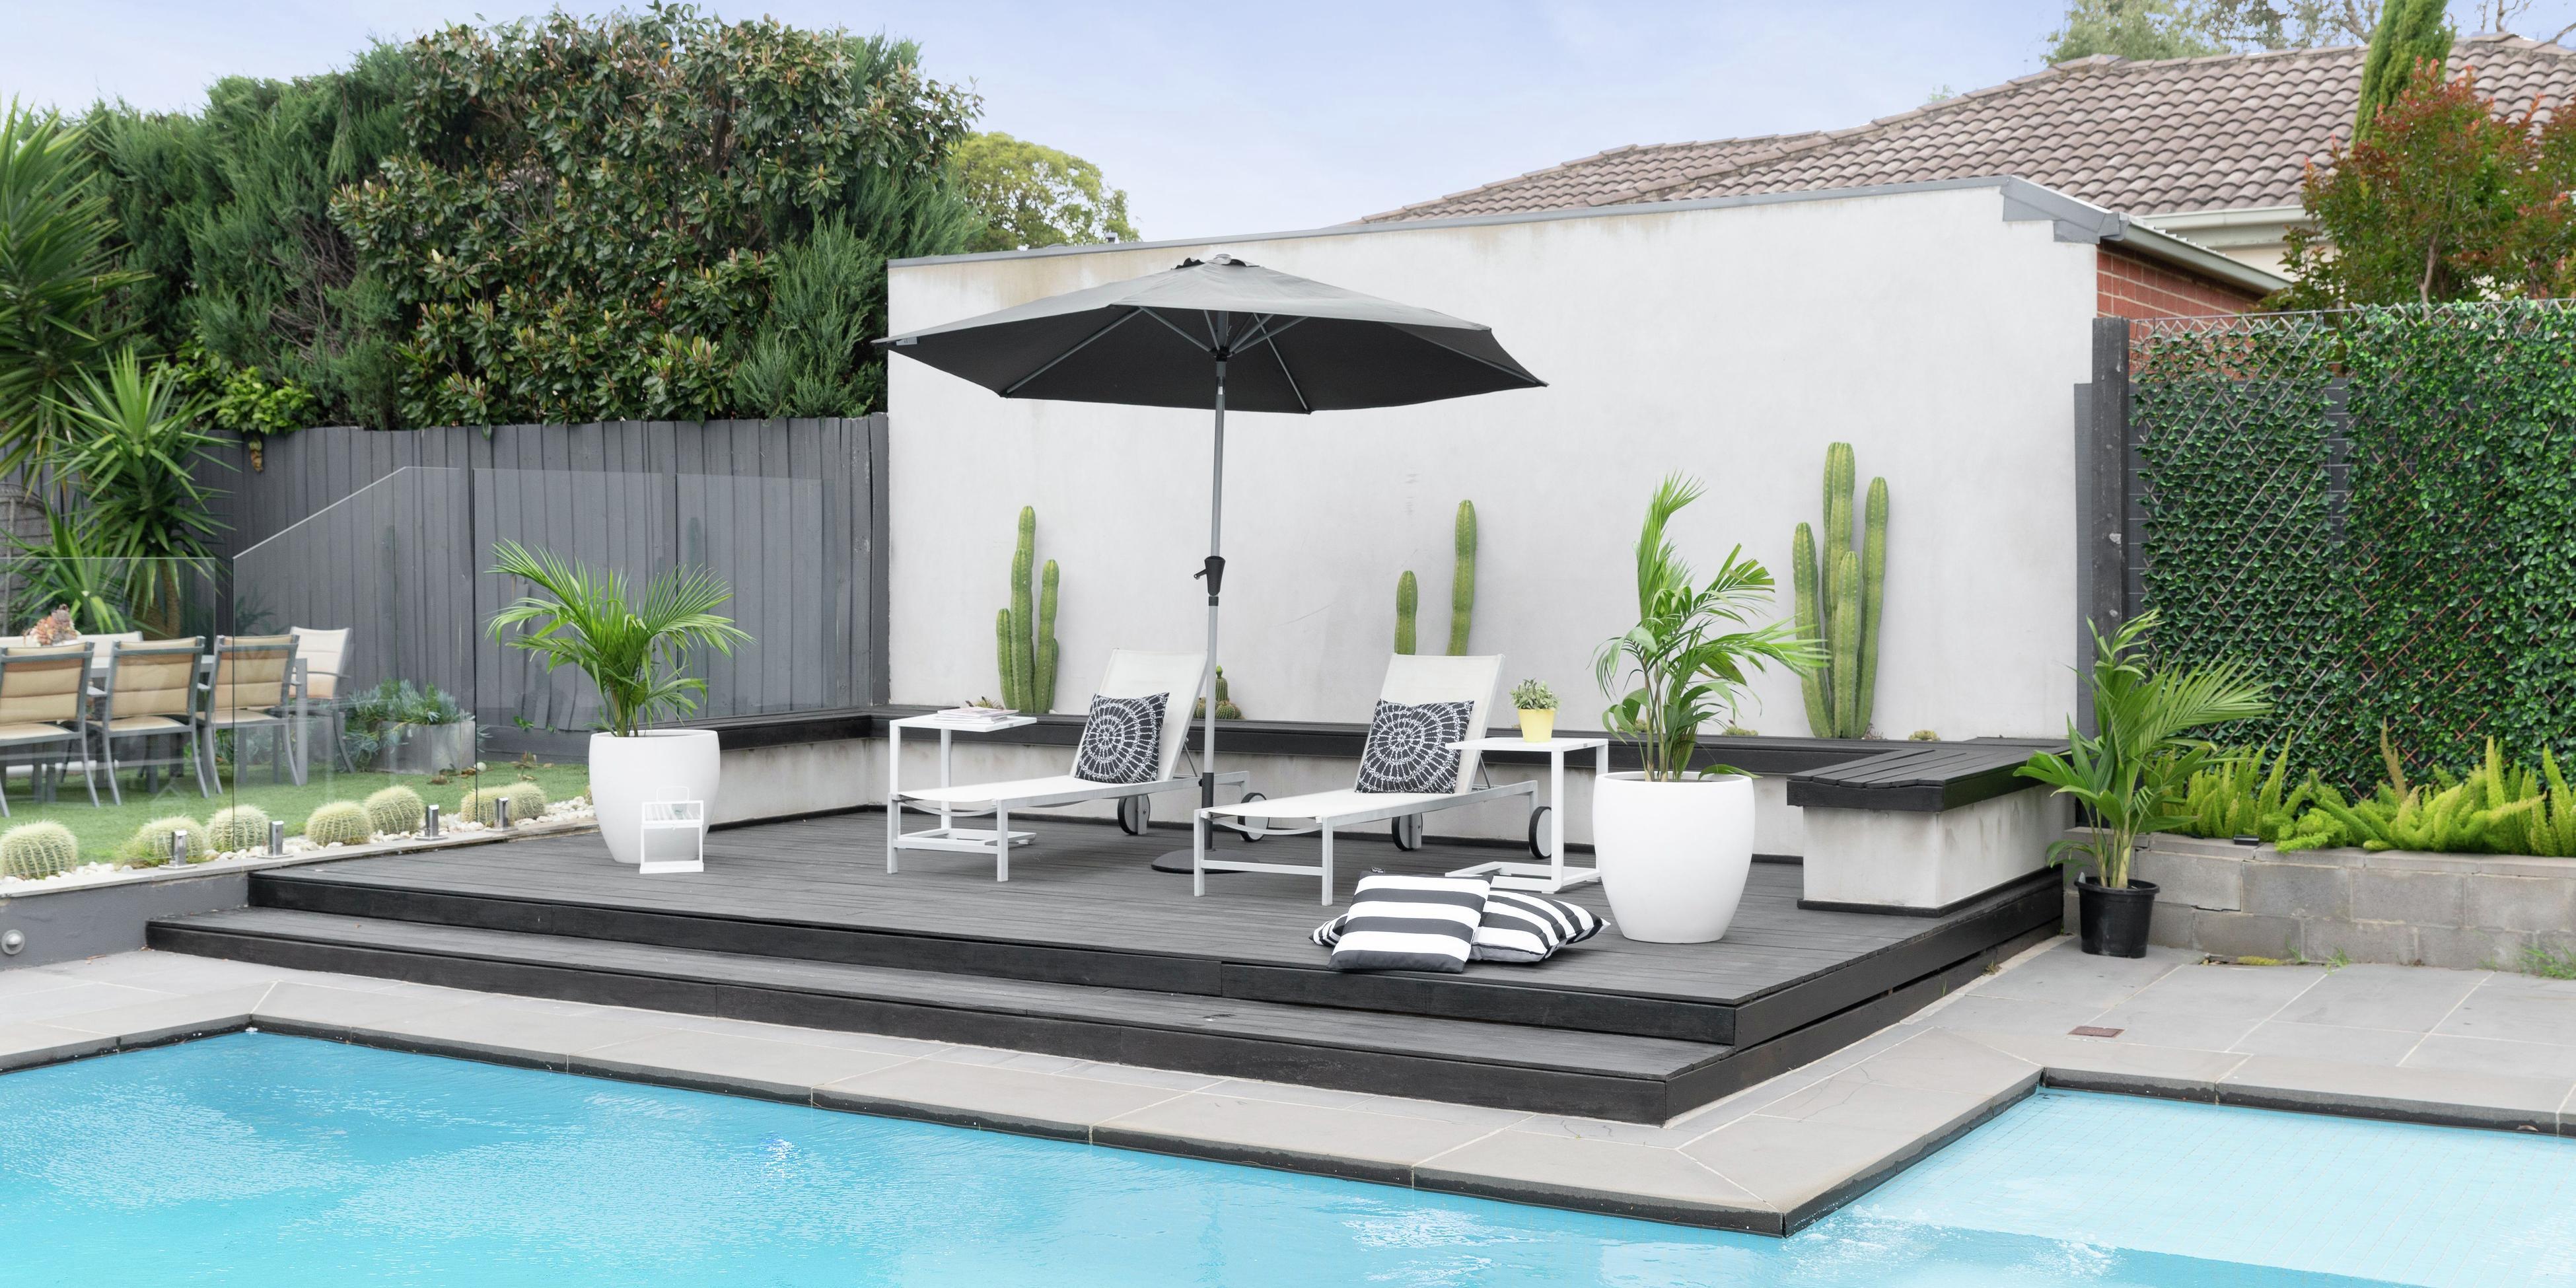 The Ultimate Outdoor Spa Buying Guide - Bunnings Australia